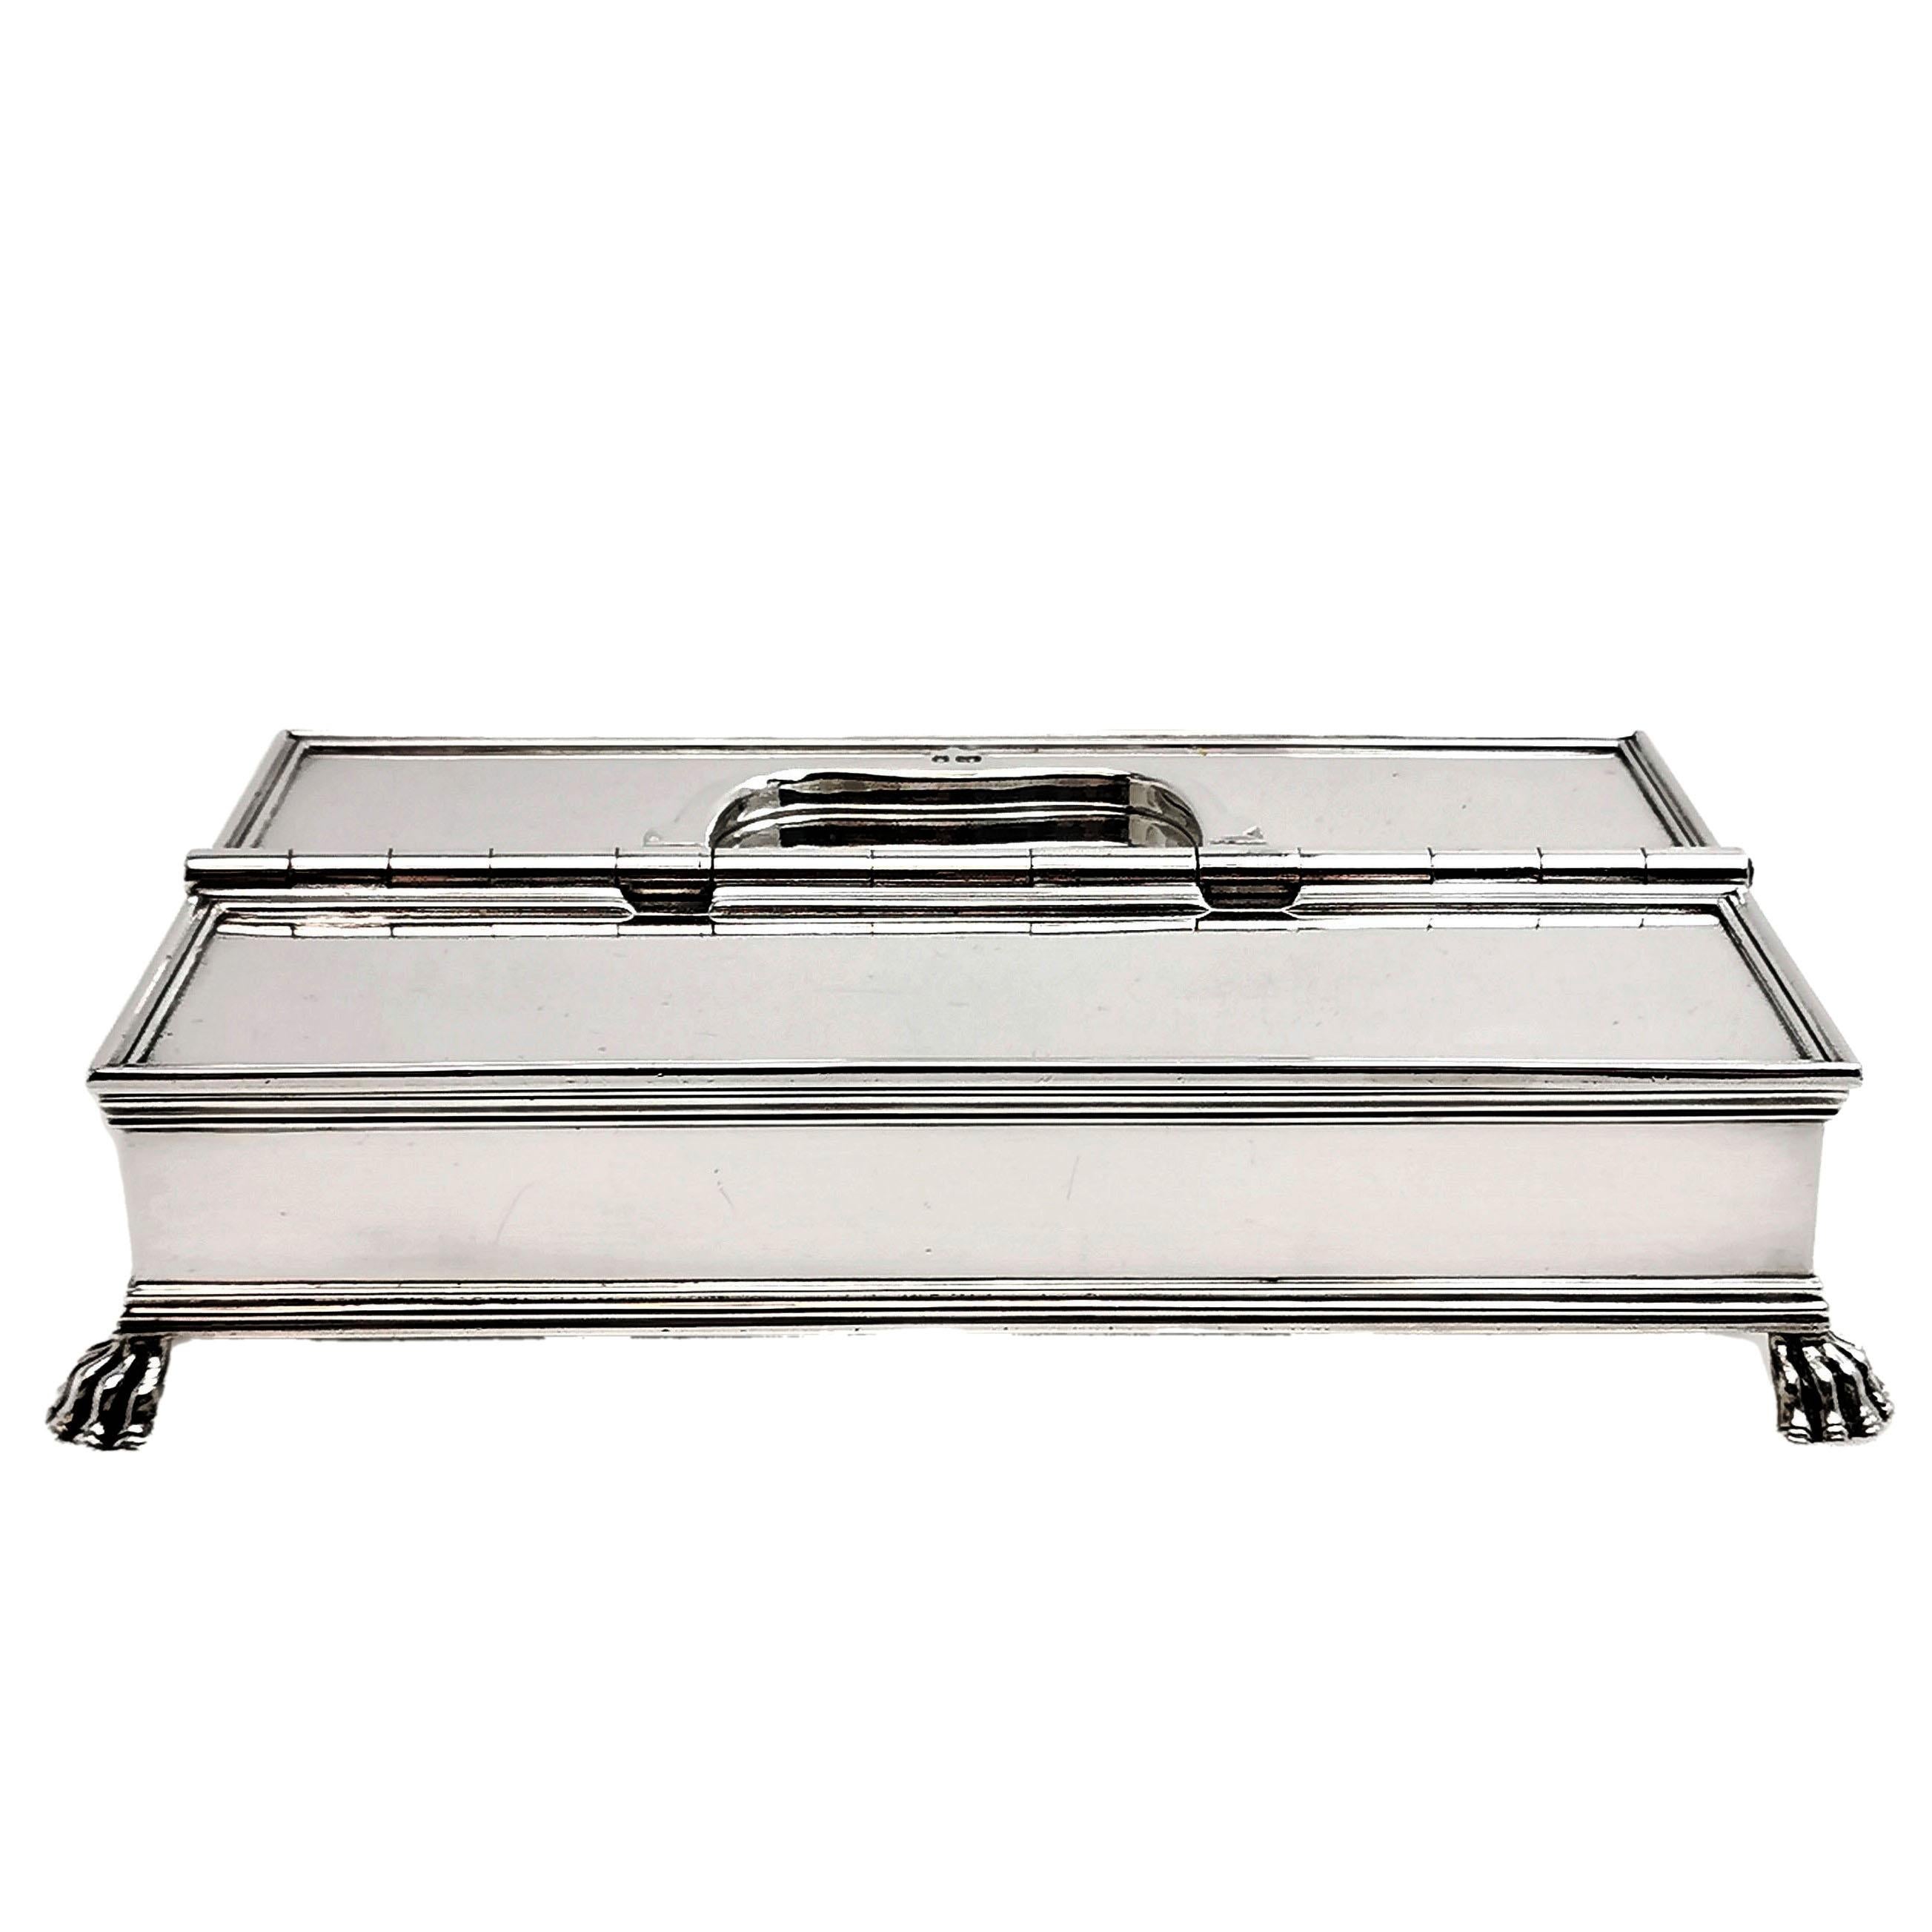 An elegant sterling Silver Inkstand in the classic 'Treasury' style from the Queen Anne Period. This Rectangular Inkstand has two compartments with hinged lids. The one has a pair of glass inkwells on either side of an empty storage compartment,